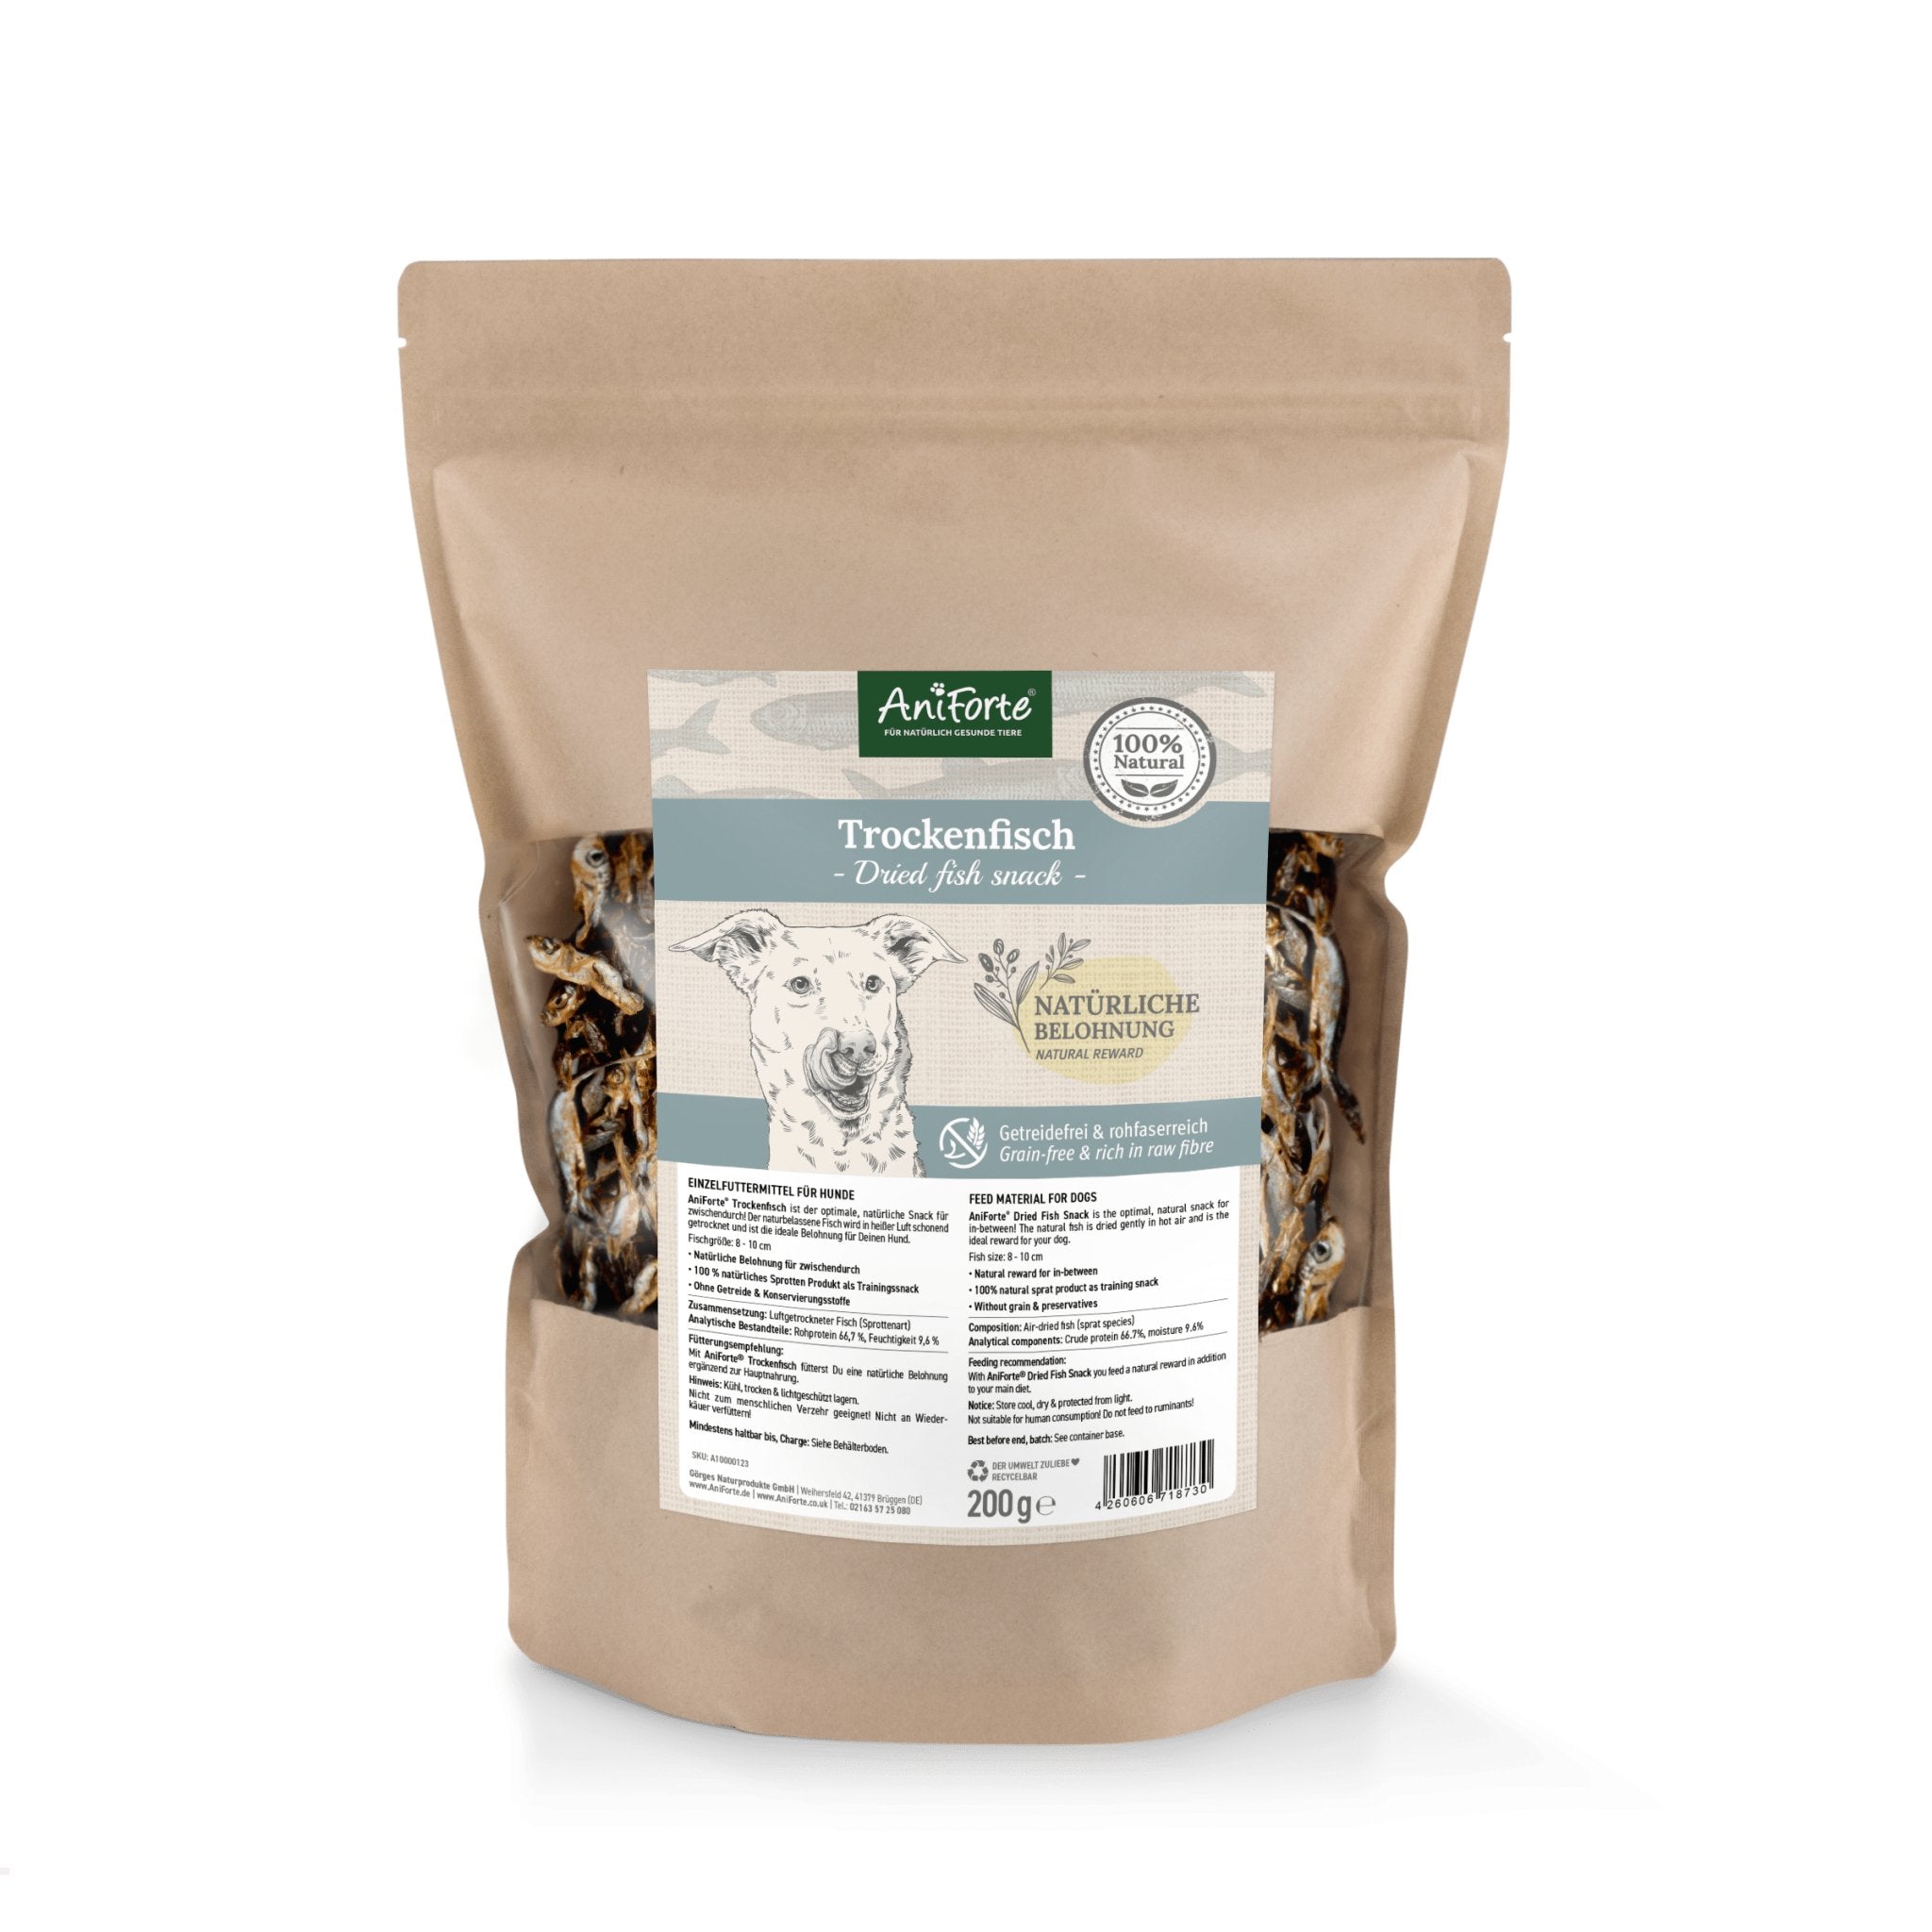 Sprats for Dogs - 200g - Natural & High Protein Dried Fish Snack - AniForte UK